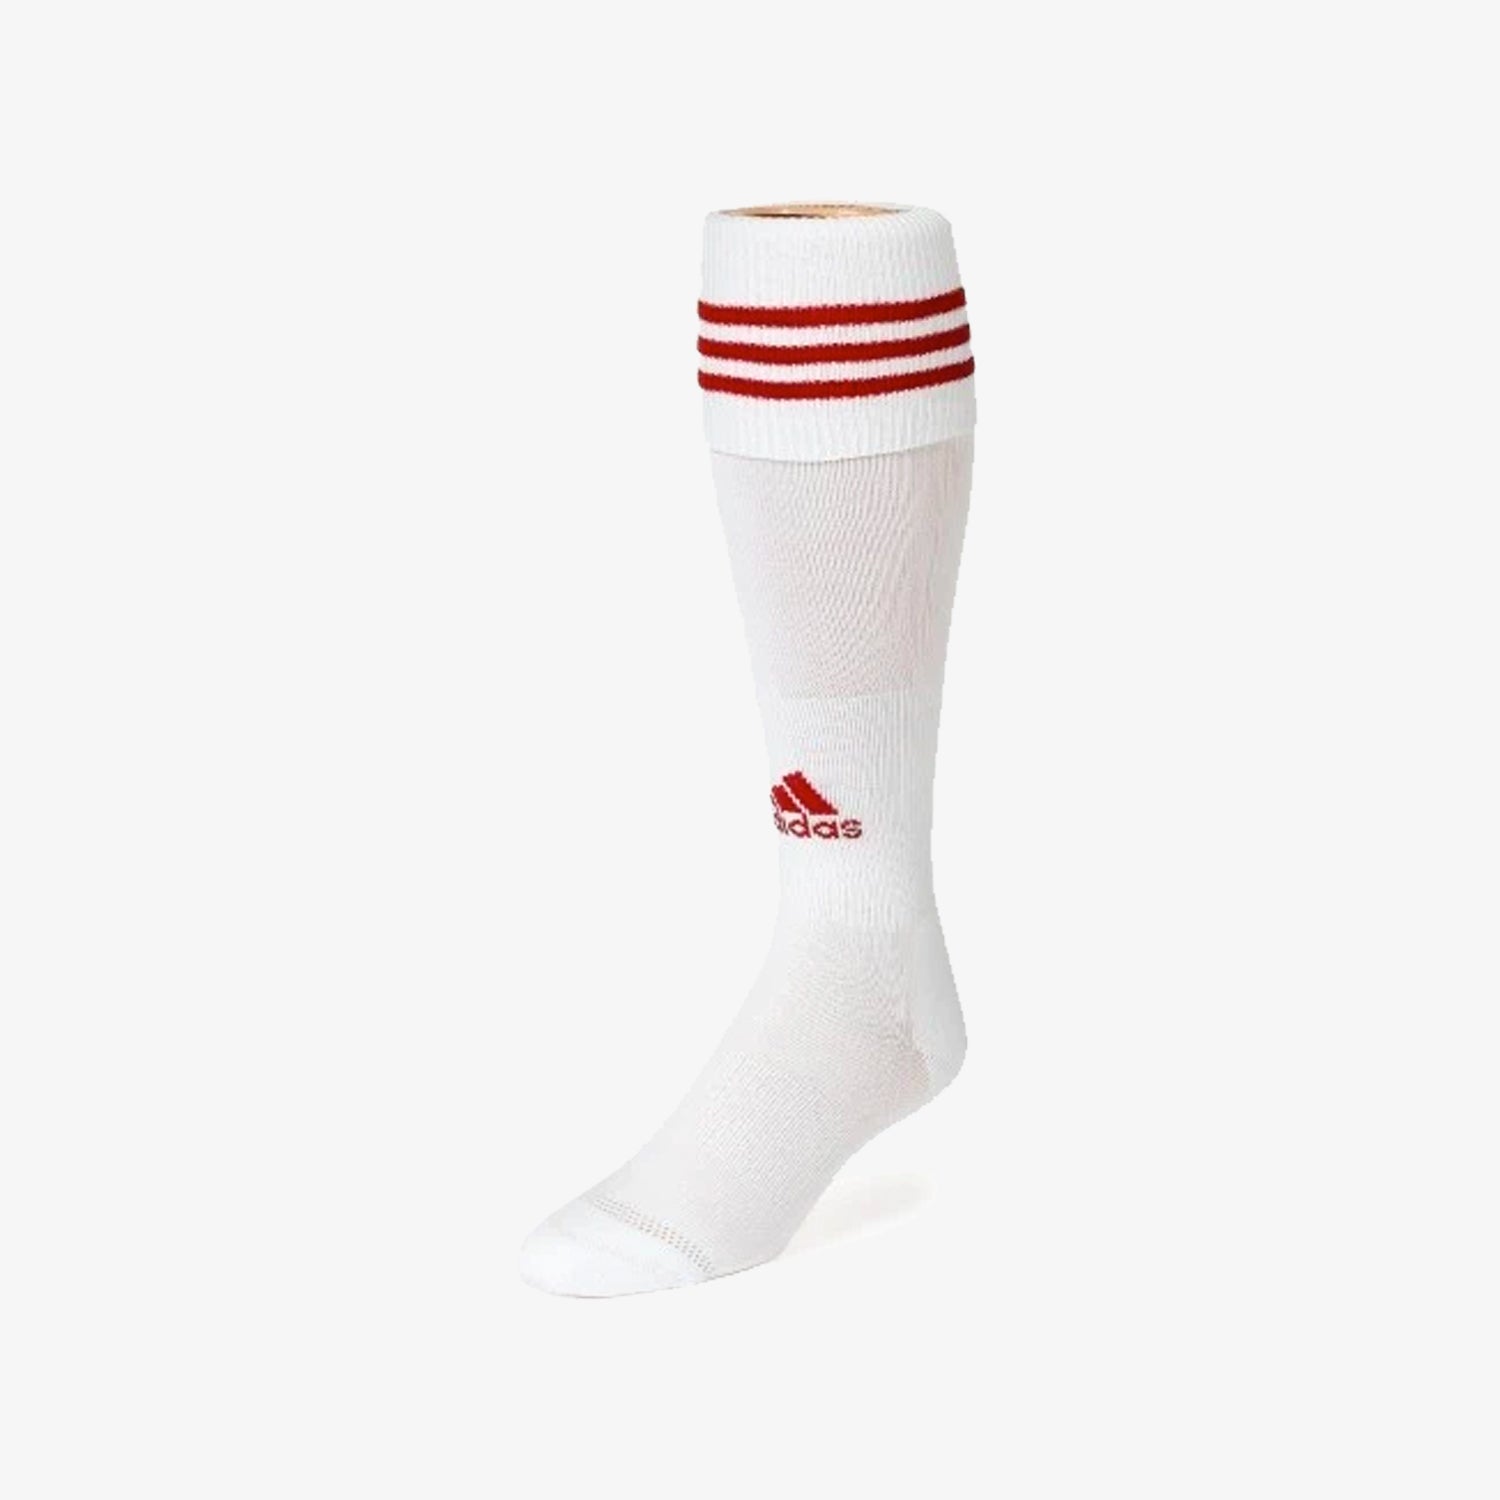 adidas Copa Zone Cushion White/Red Small